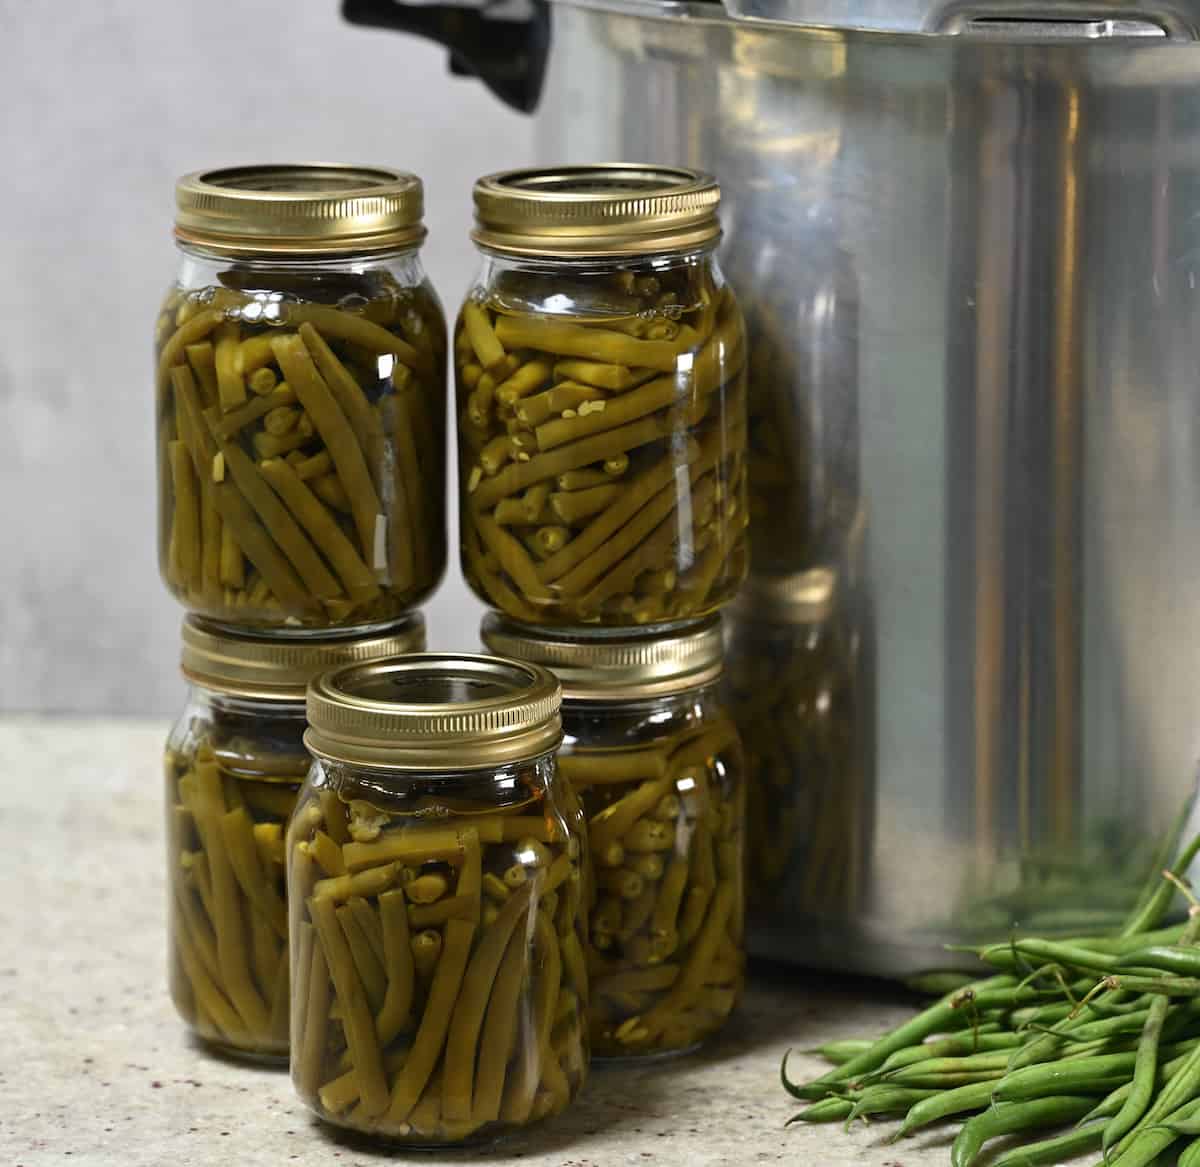 The green bean jars were checked for sealing.